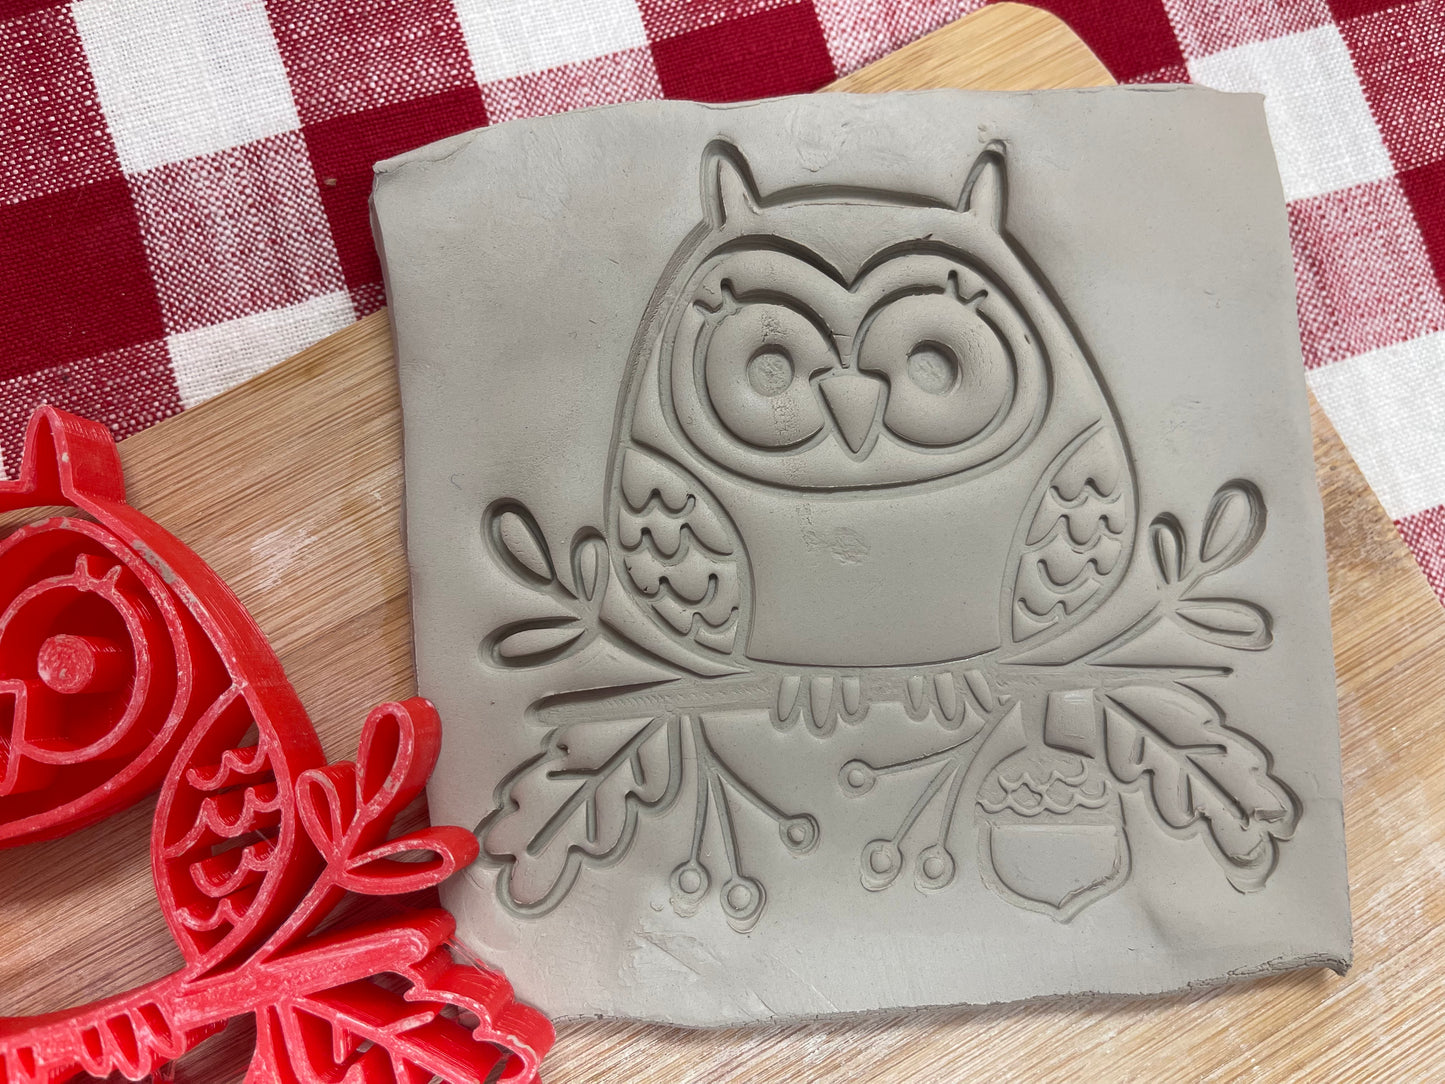 Autumn Stamp Series - Autumn Owl with Leaves stamp, plastic 3D printed,  multiple sizes